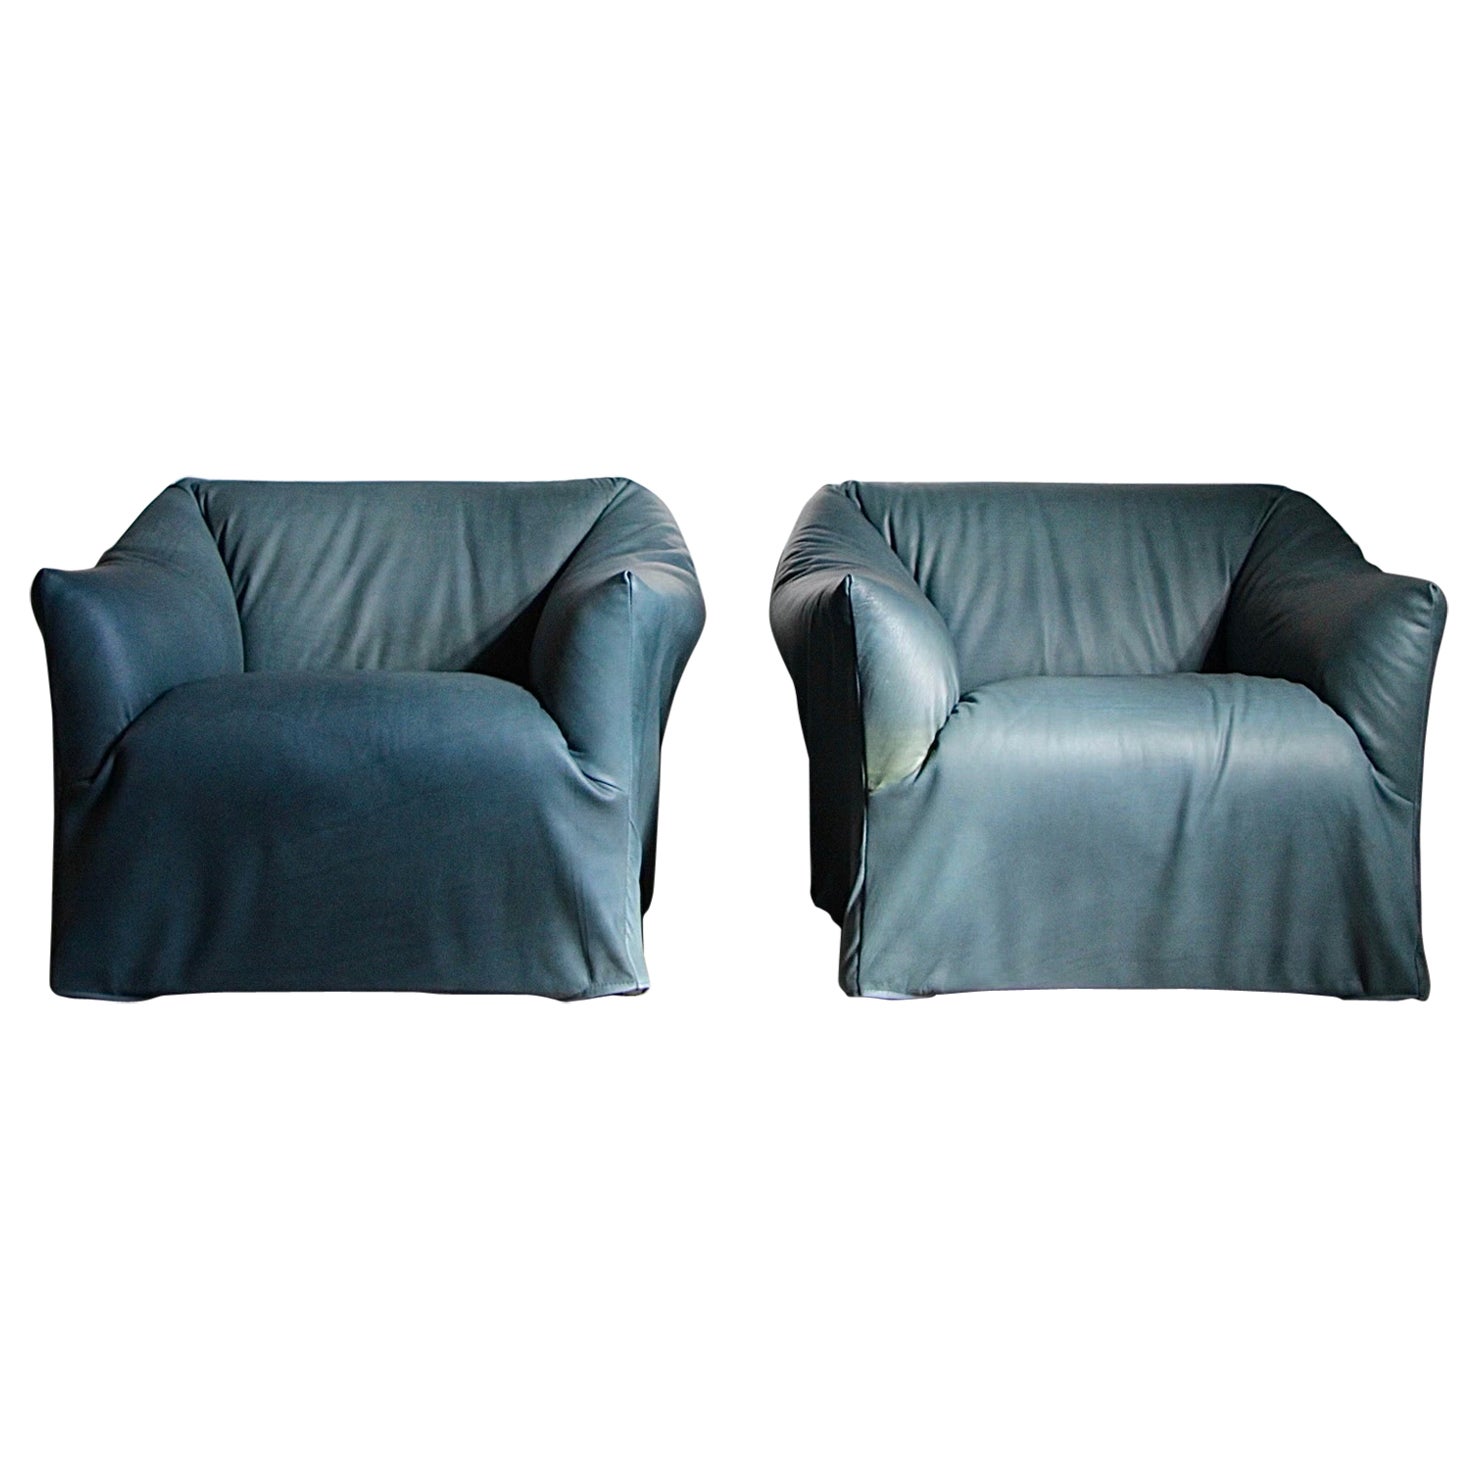 Mario Bellini  "Tentazione" Lounge Chairs for Cassina in Teal Calfskin Leather